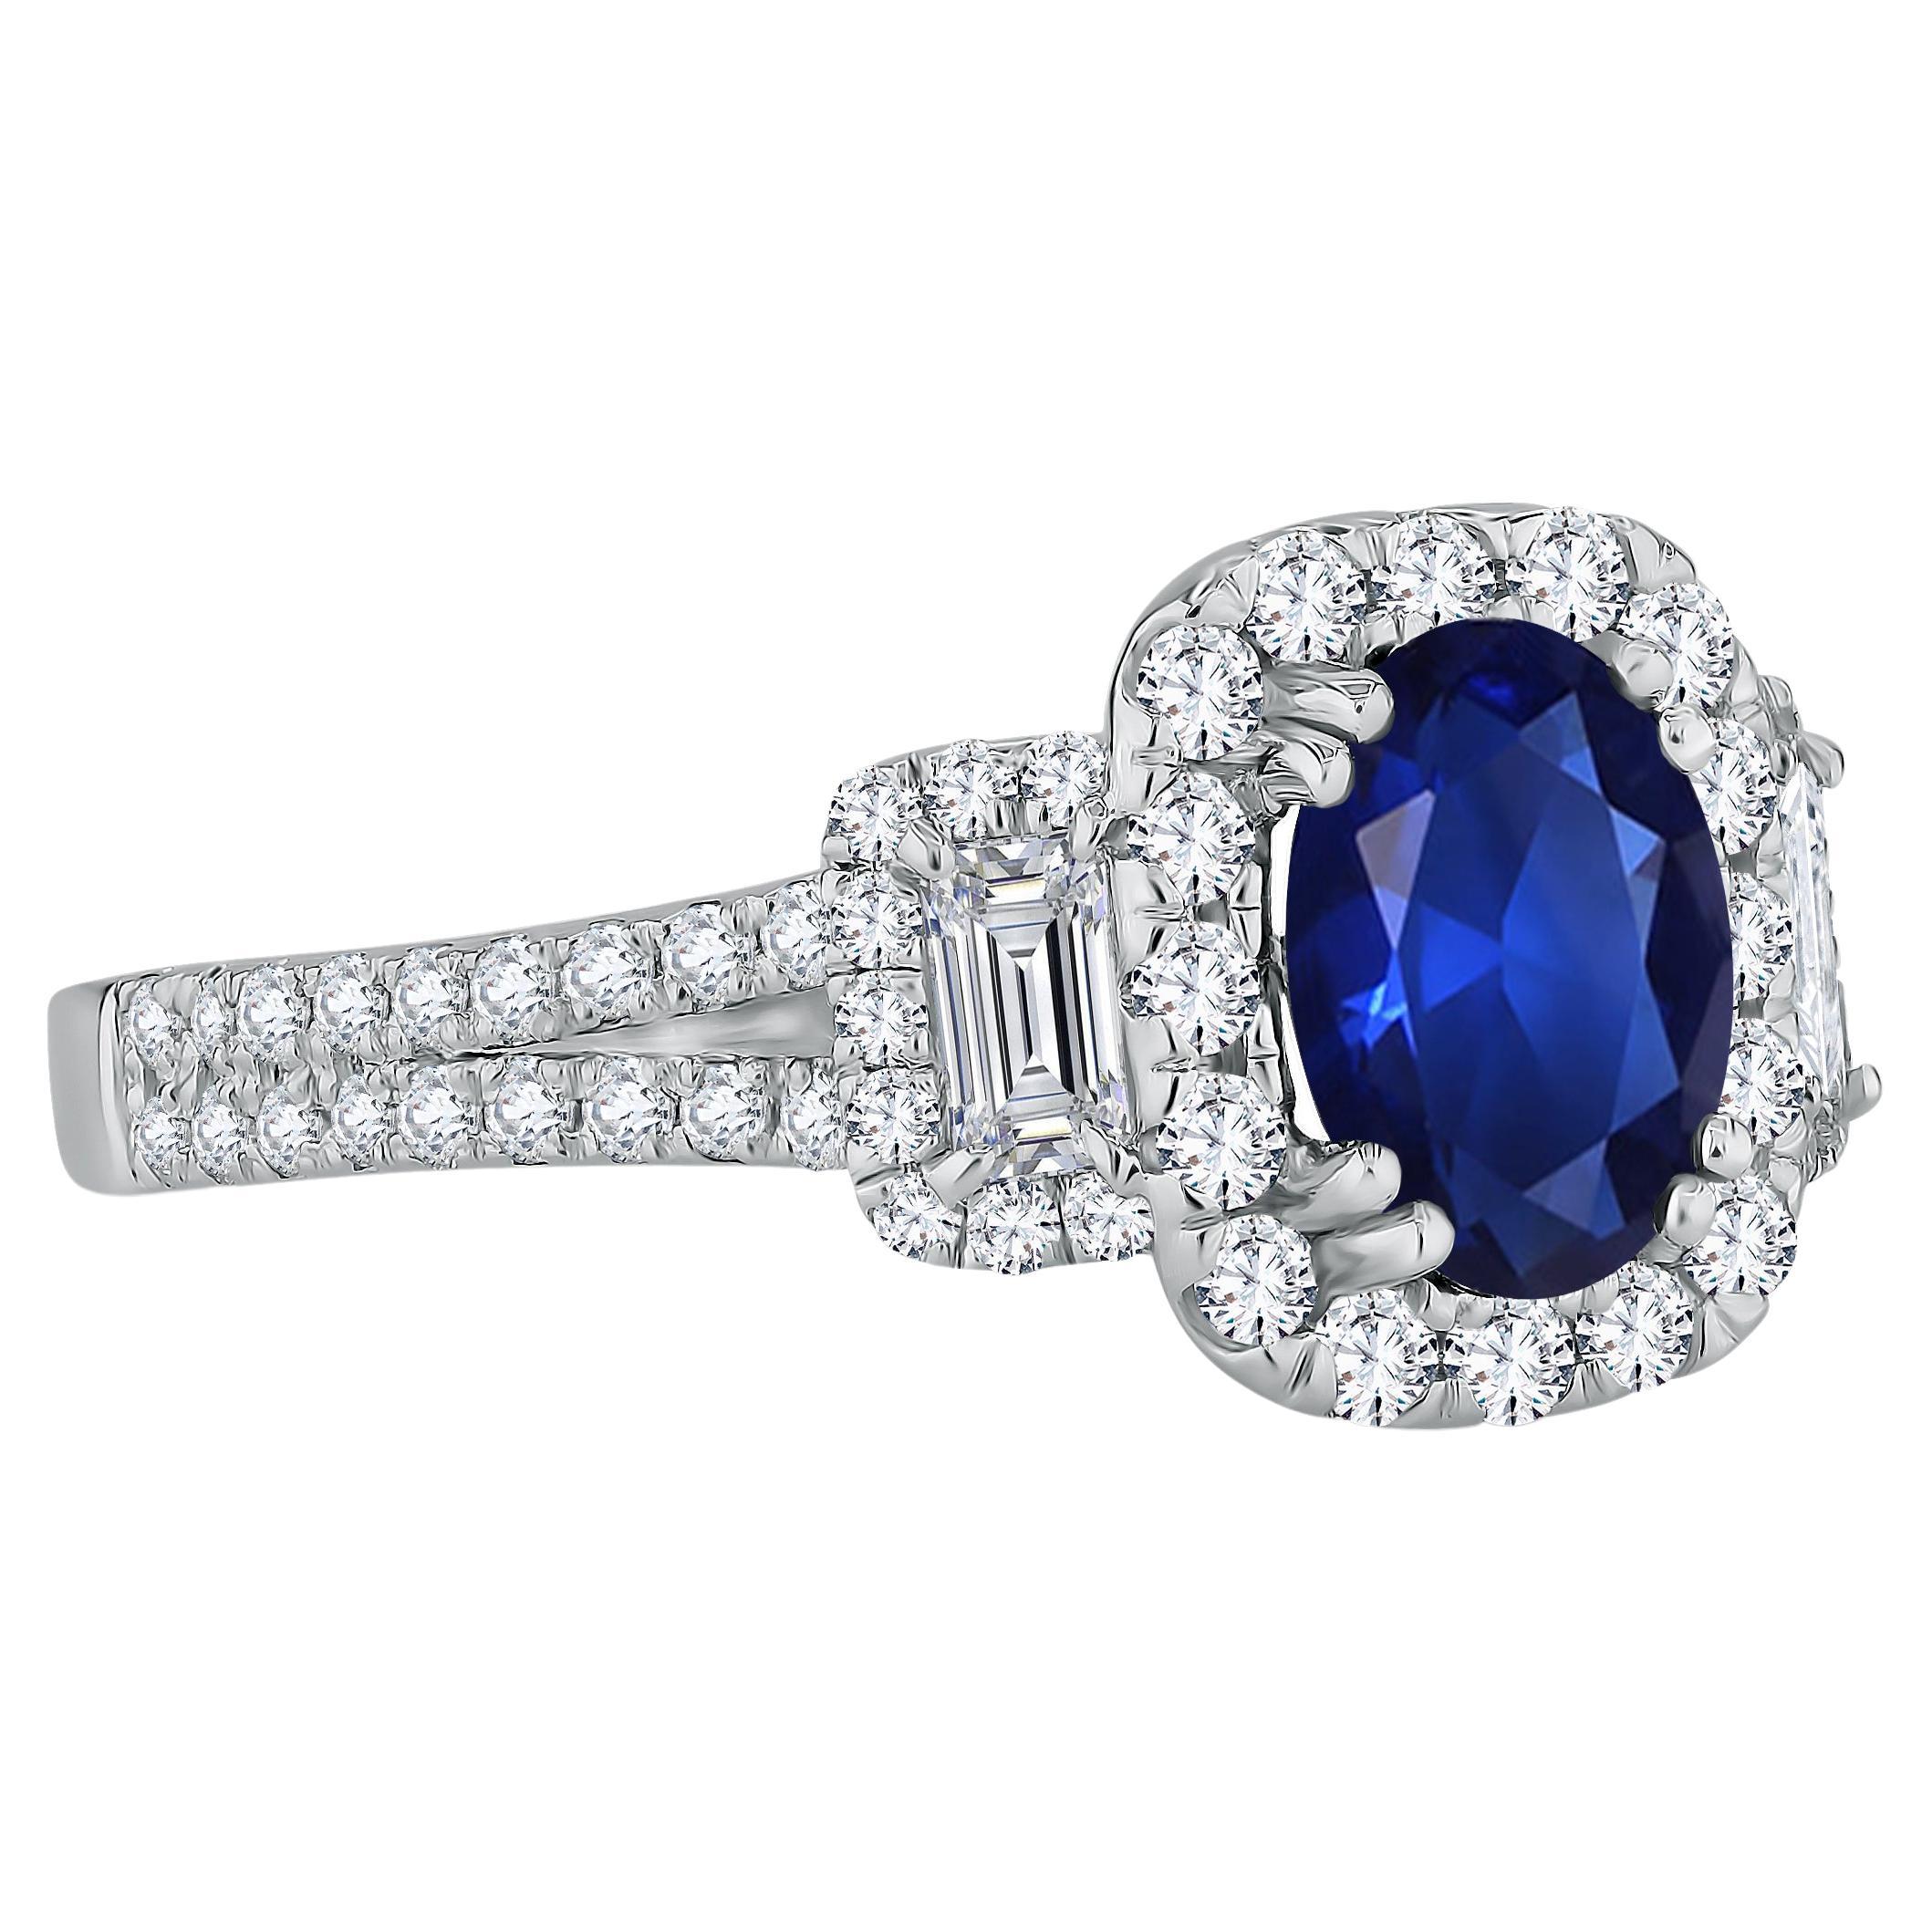 1.25 Carat Oval Cut Sapphire and 0.72 Carat Natural Diamond Ring in 18W ref1570 For Sale